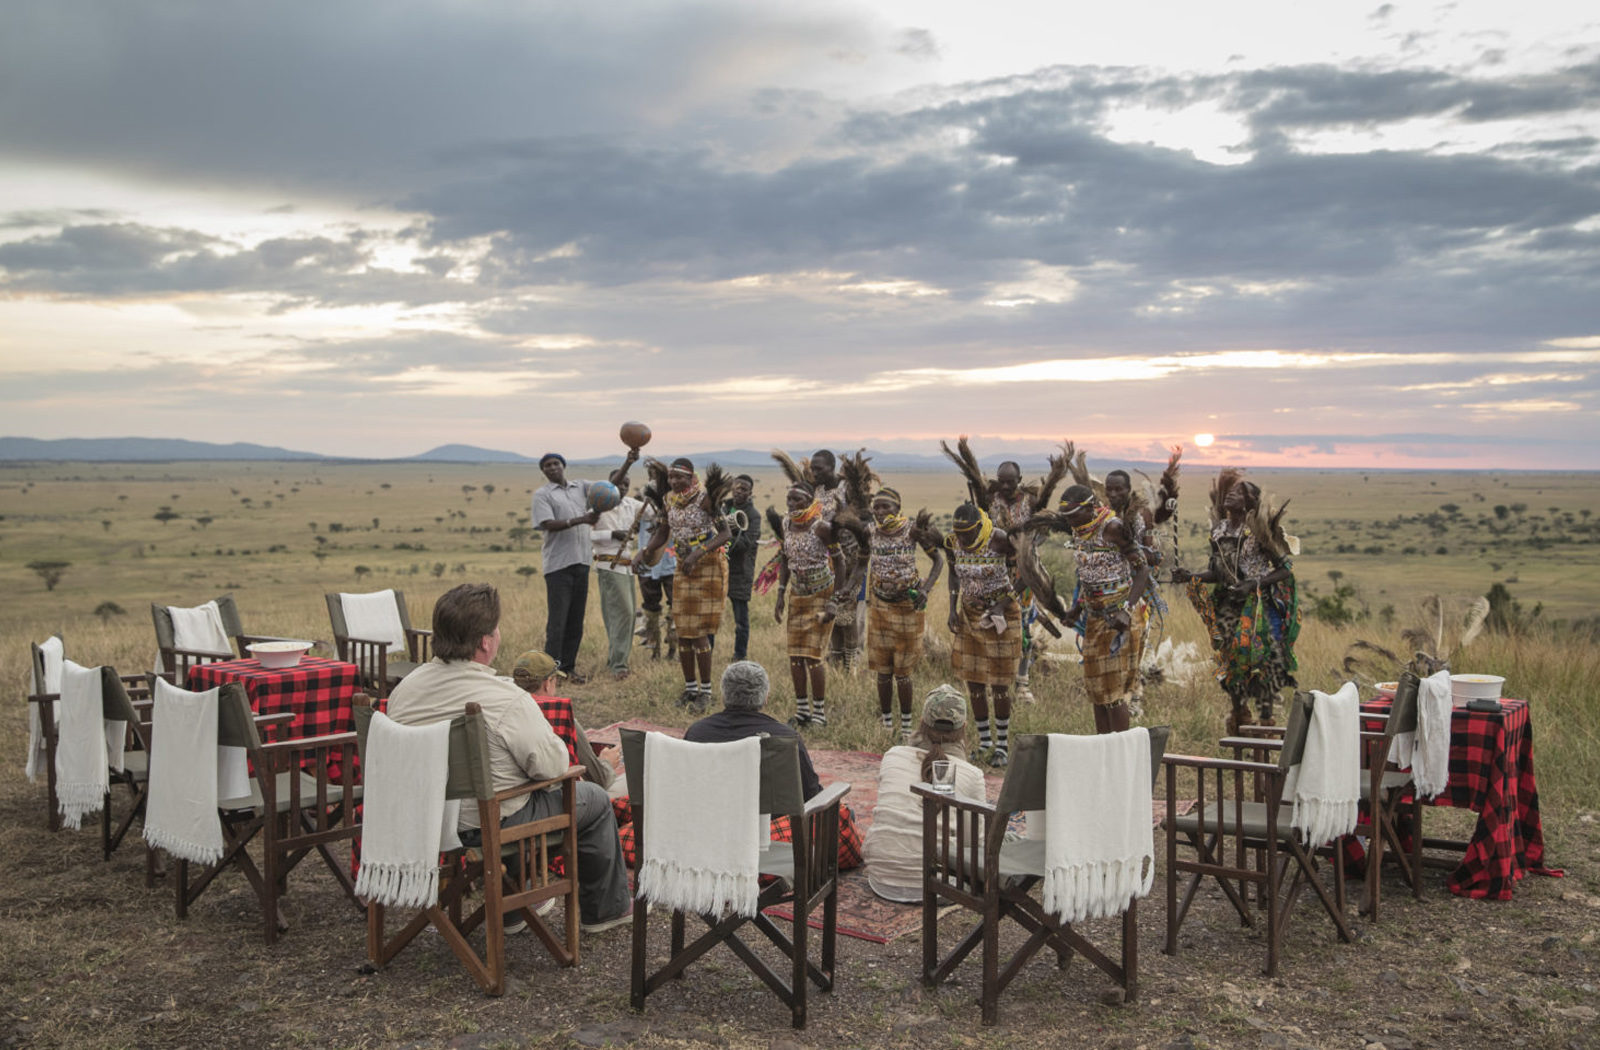 Cultural Interaction in The Serengeti